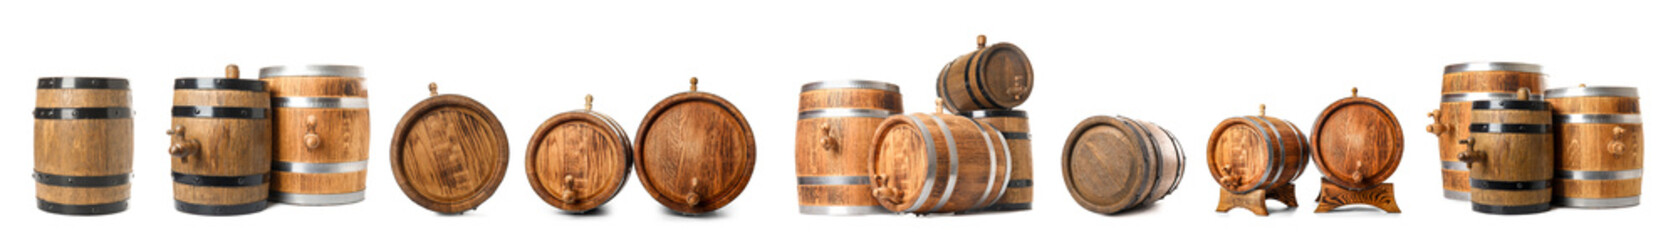 Collage of wooden barrels on white background